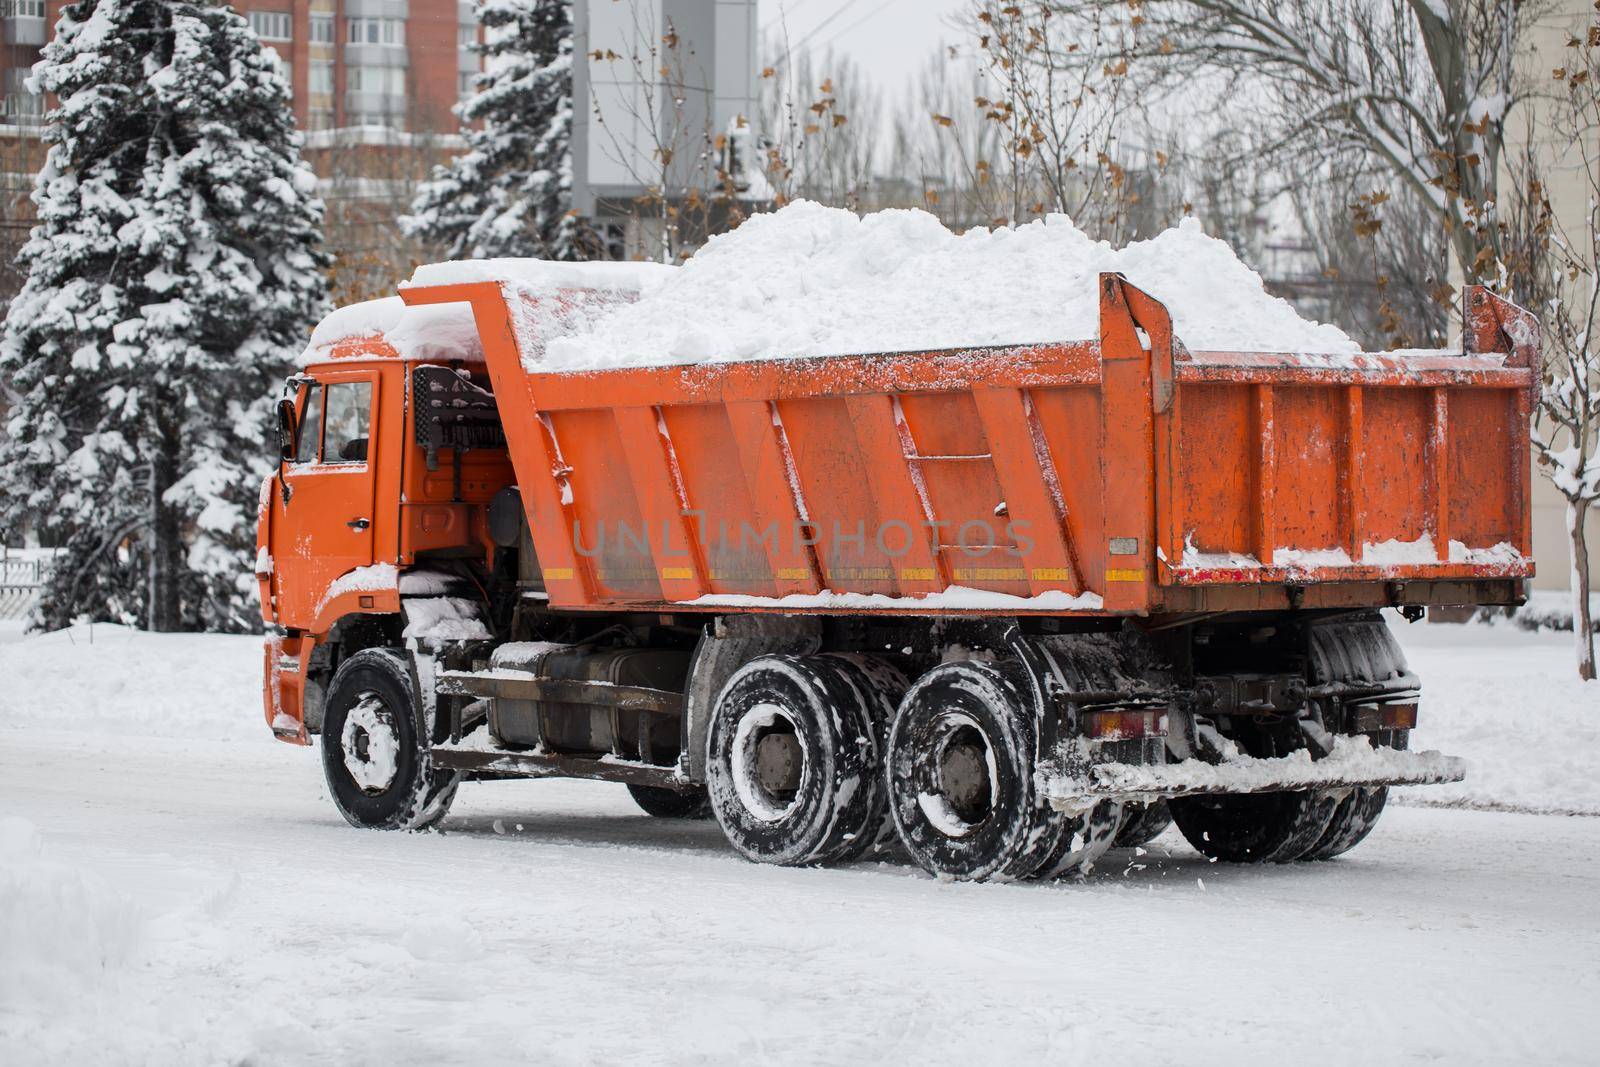 Dump truck full of snow driving through city street, snow hauling. Dump truck transports snow to dump site by StudioPeace